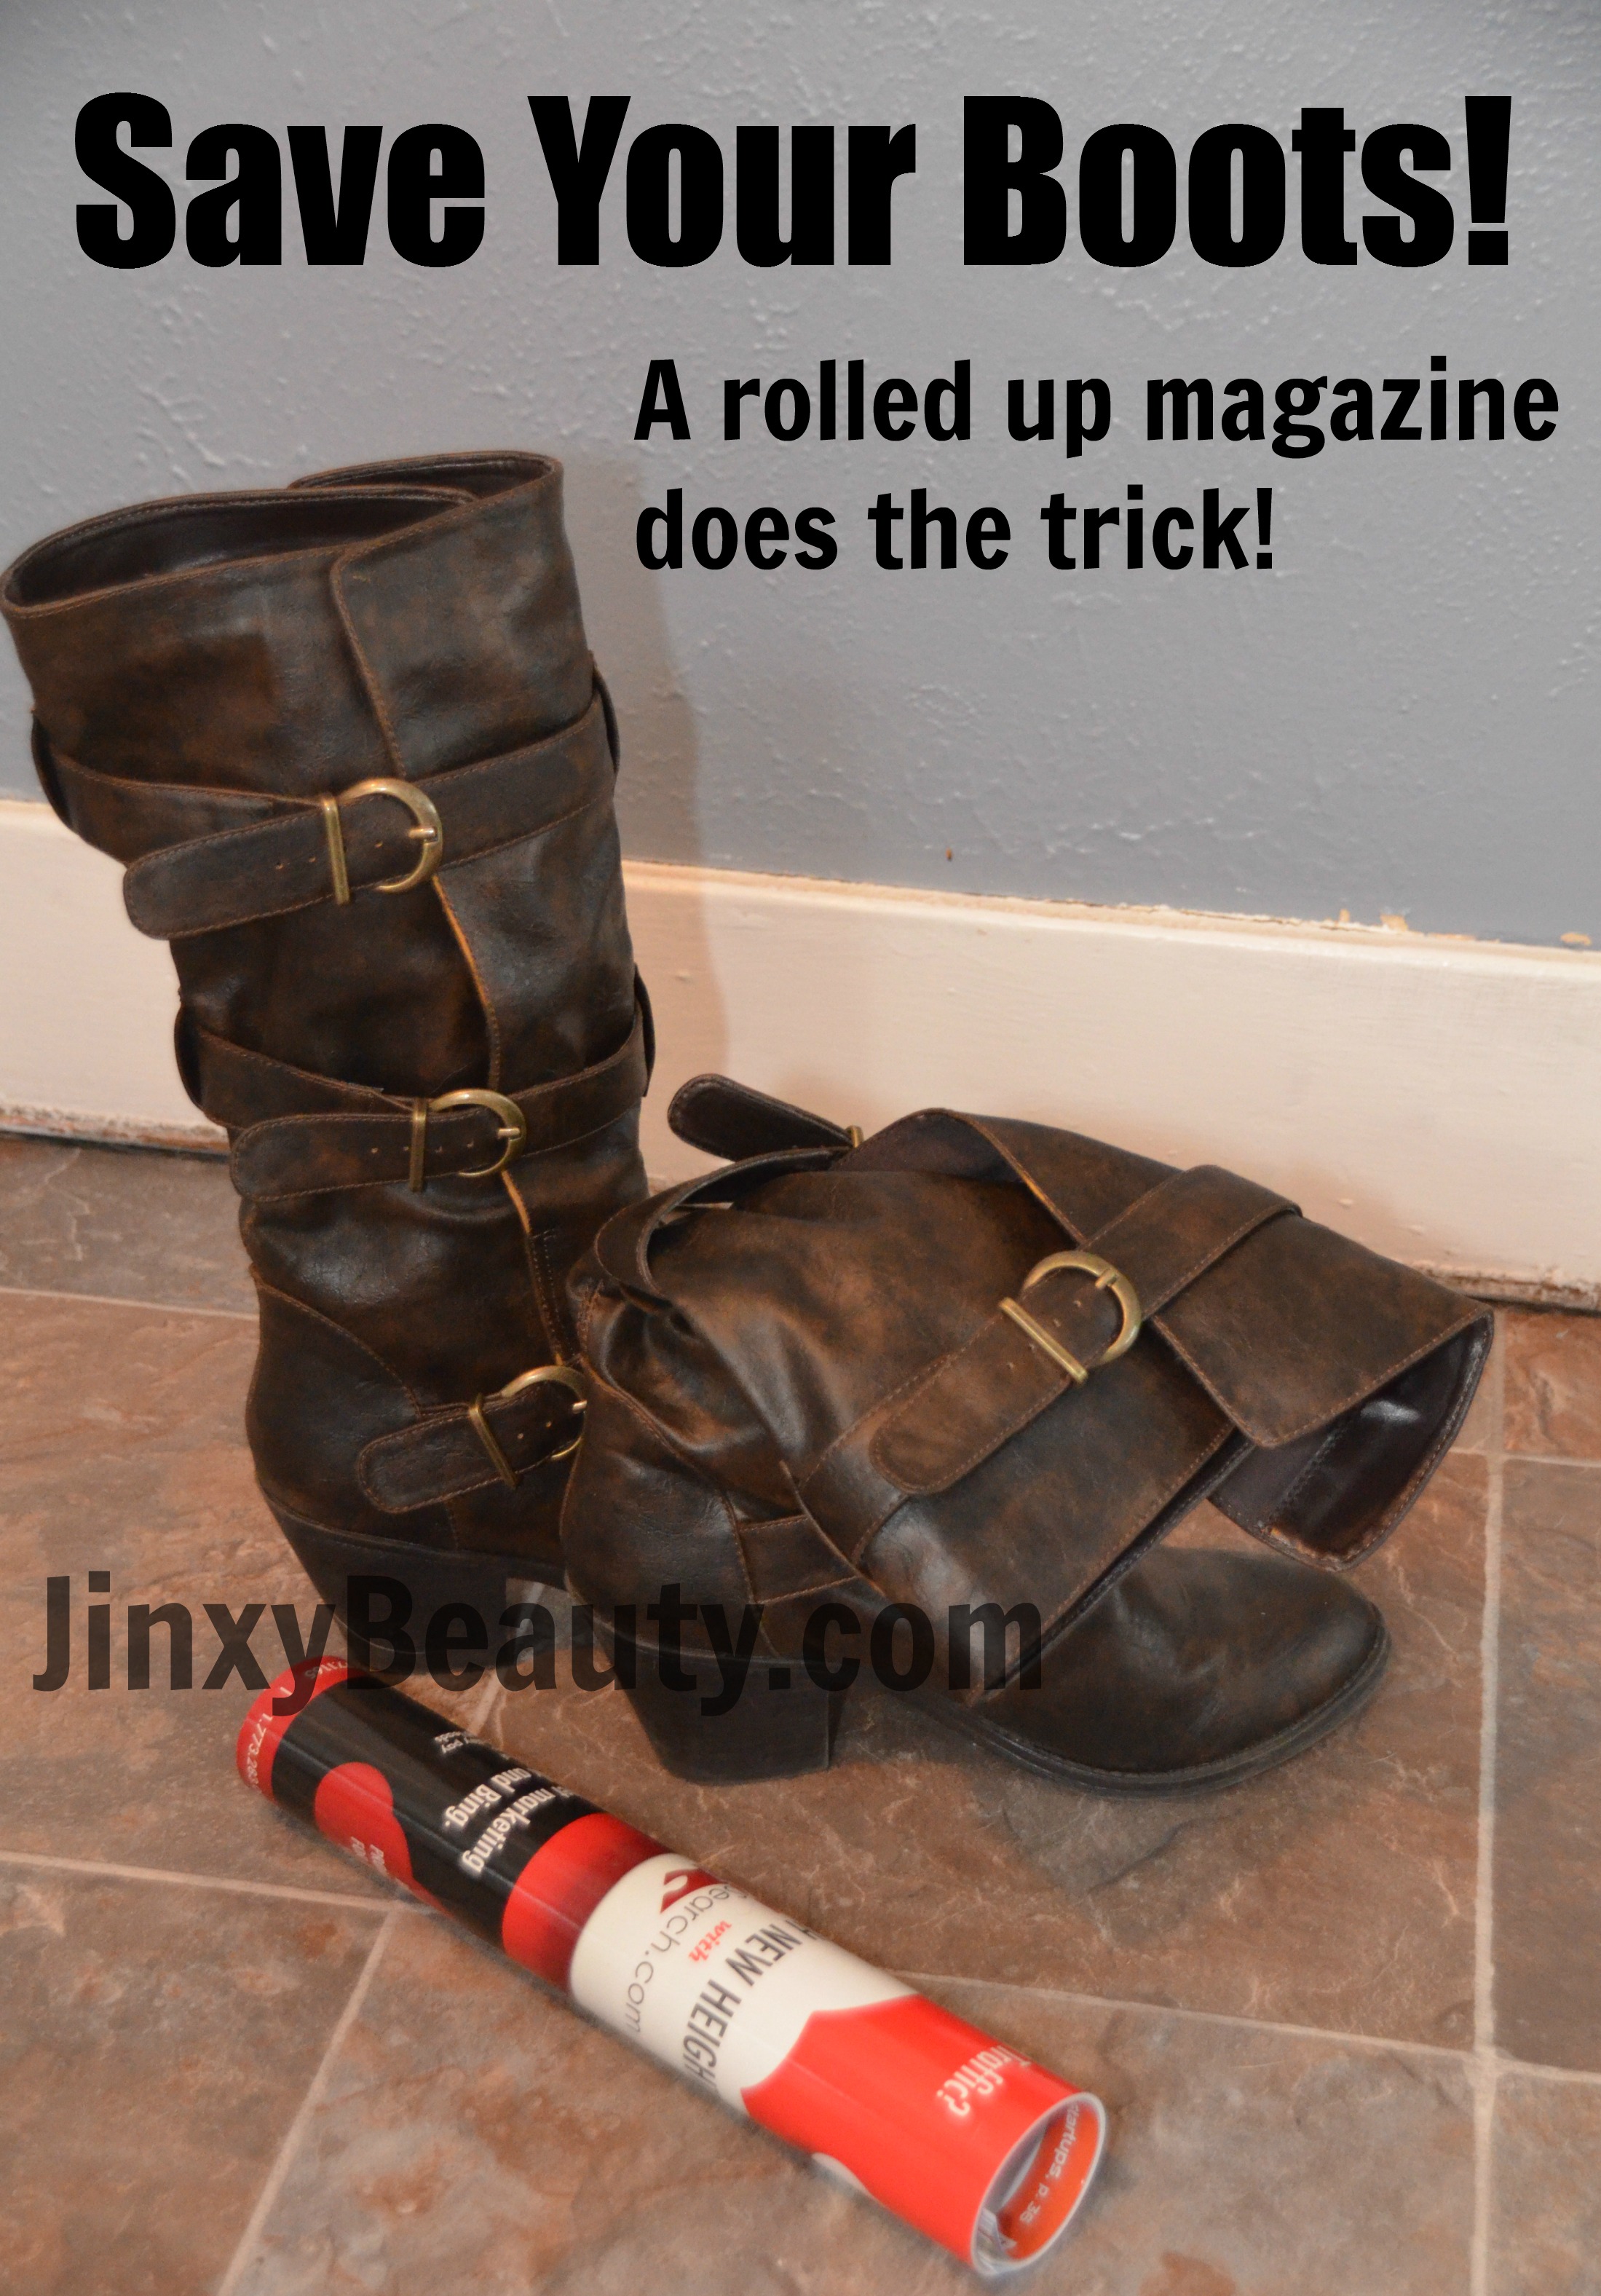 Save your boots with a rolled up magazine for storage.